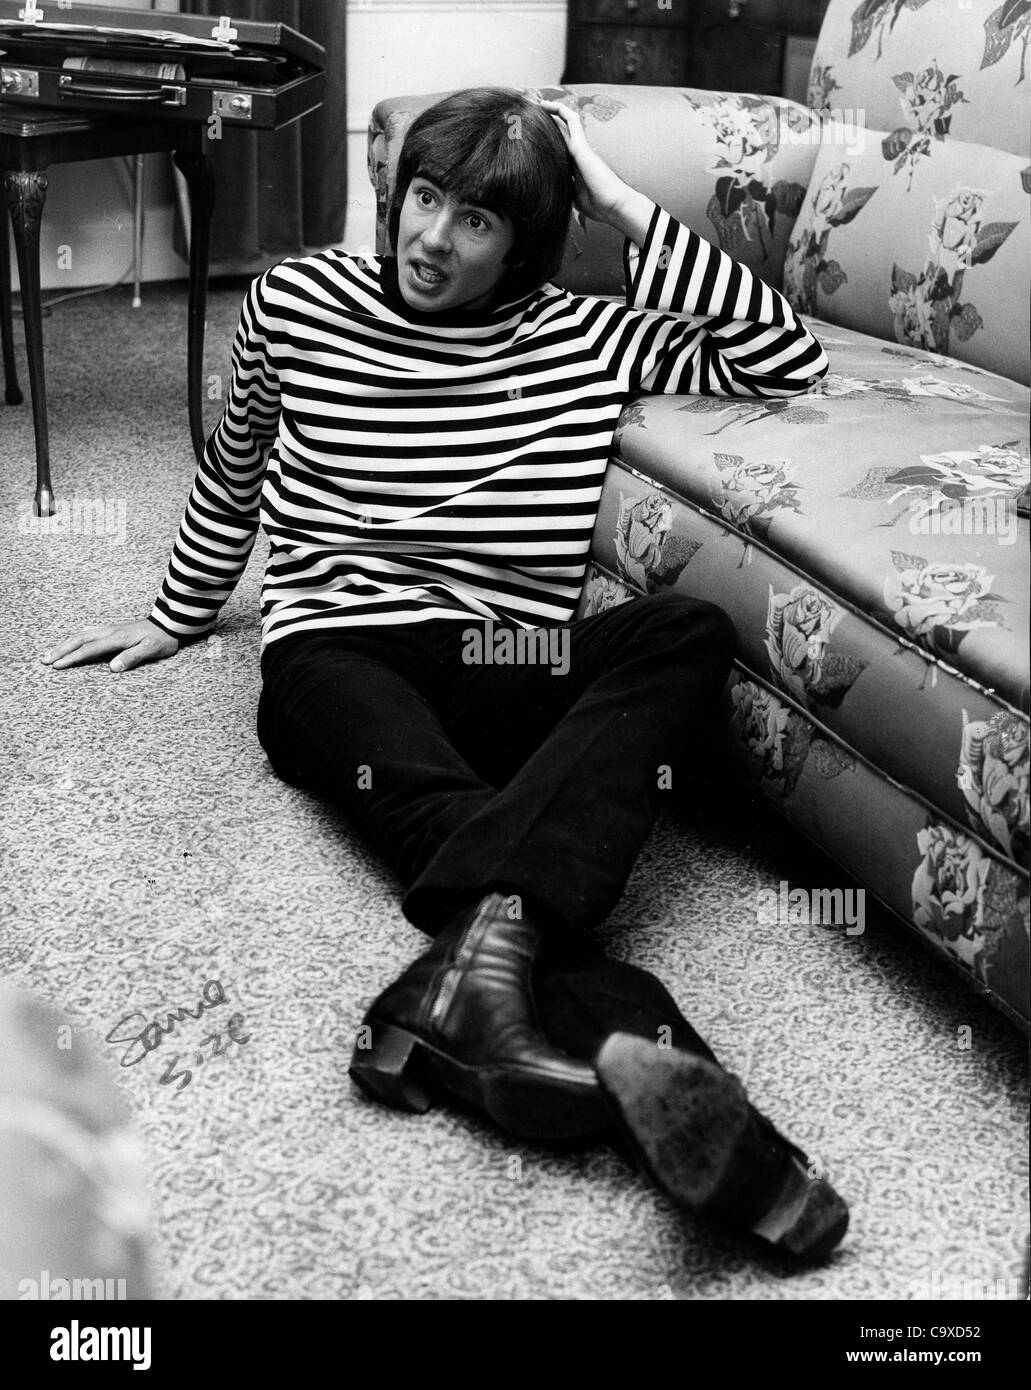 Feb. 13, 1967 - London, England, U.K. - Singer of the television rock band The Monkees DAVY JONES, born December 30, 1945, at the Grosvenor House Hotel after his arrival from New York. (Credit Image: © KEYSTONE Pictures USA/ZUMAPRESS.com) Stock Photo